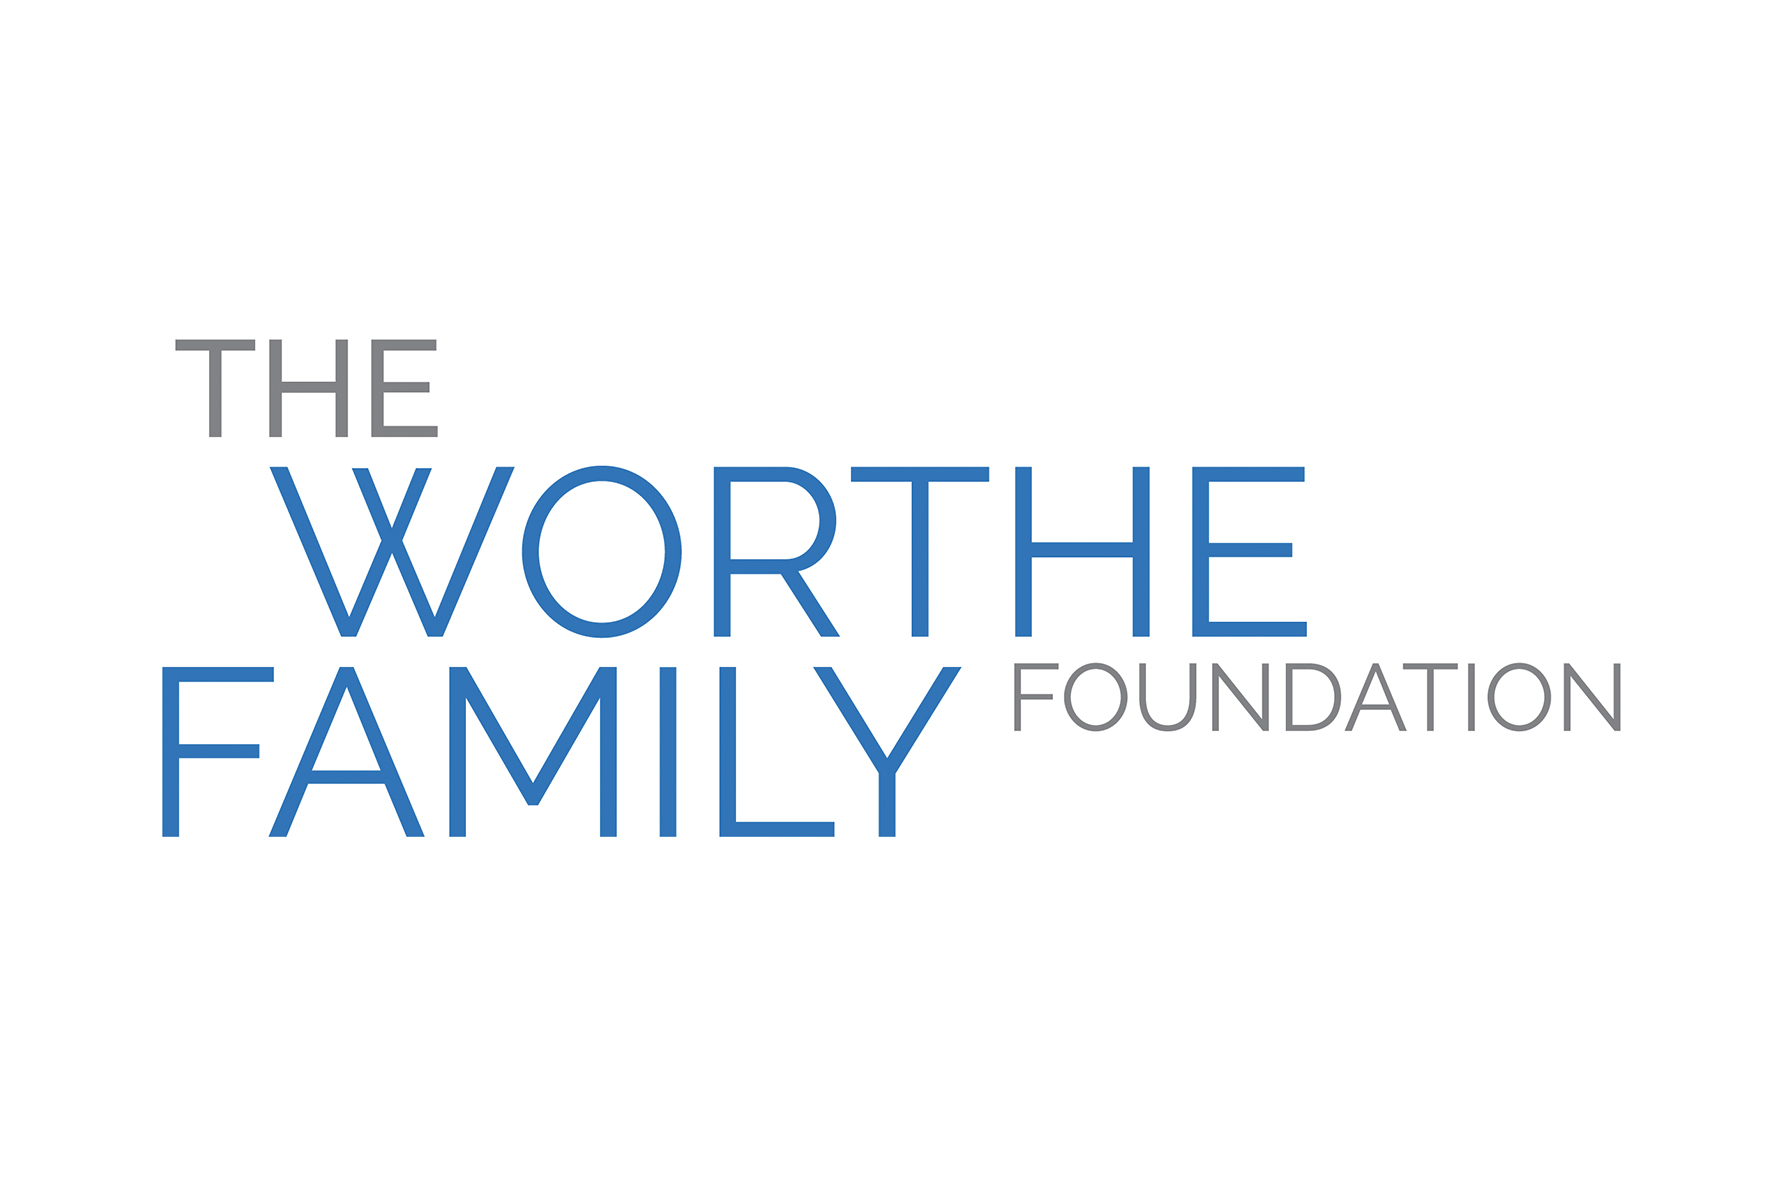 The Worthe Family Foundation